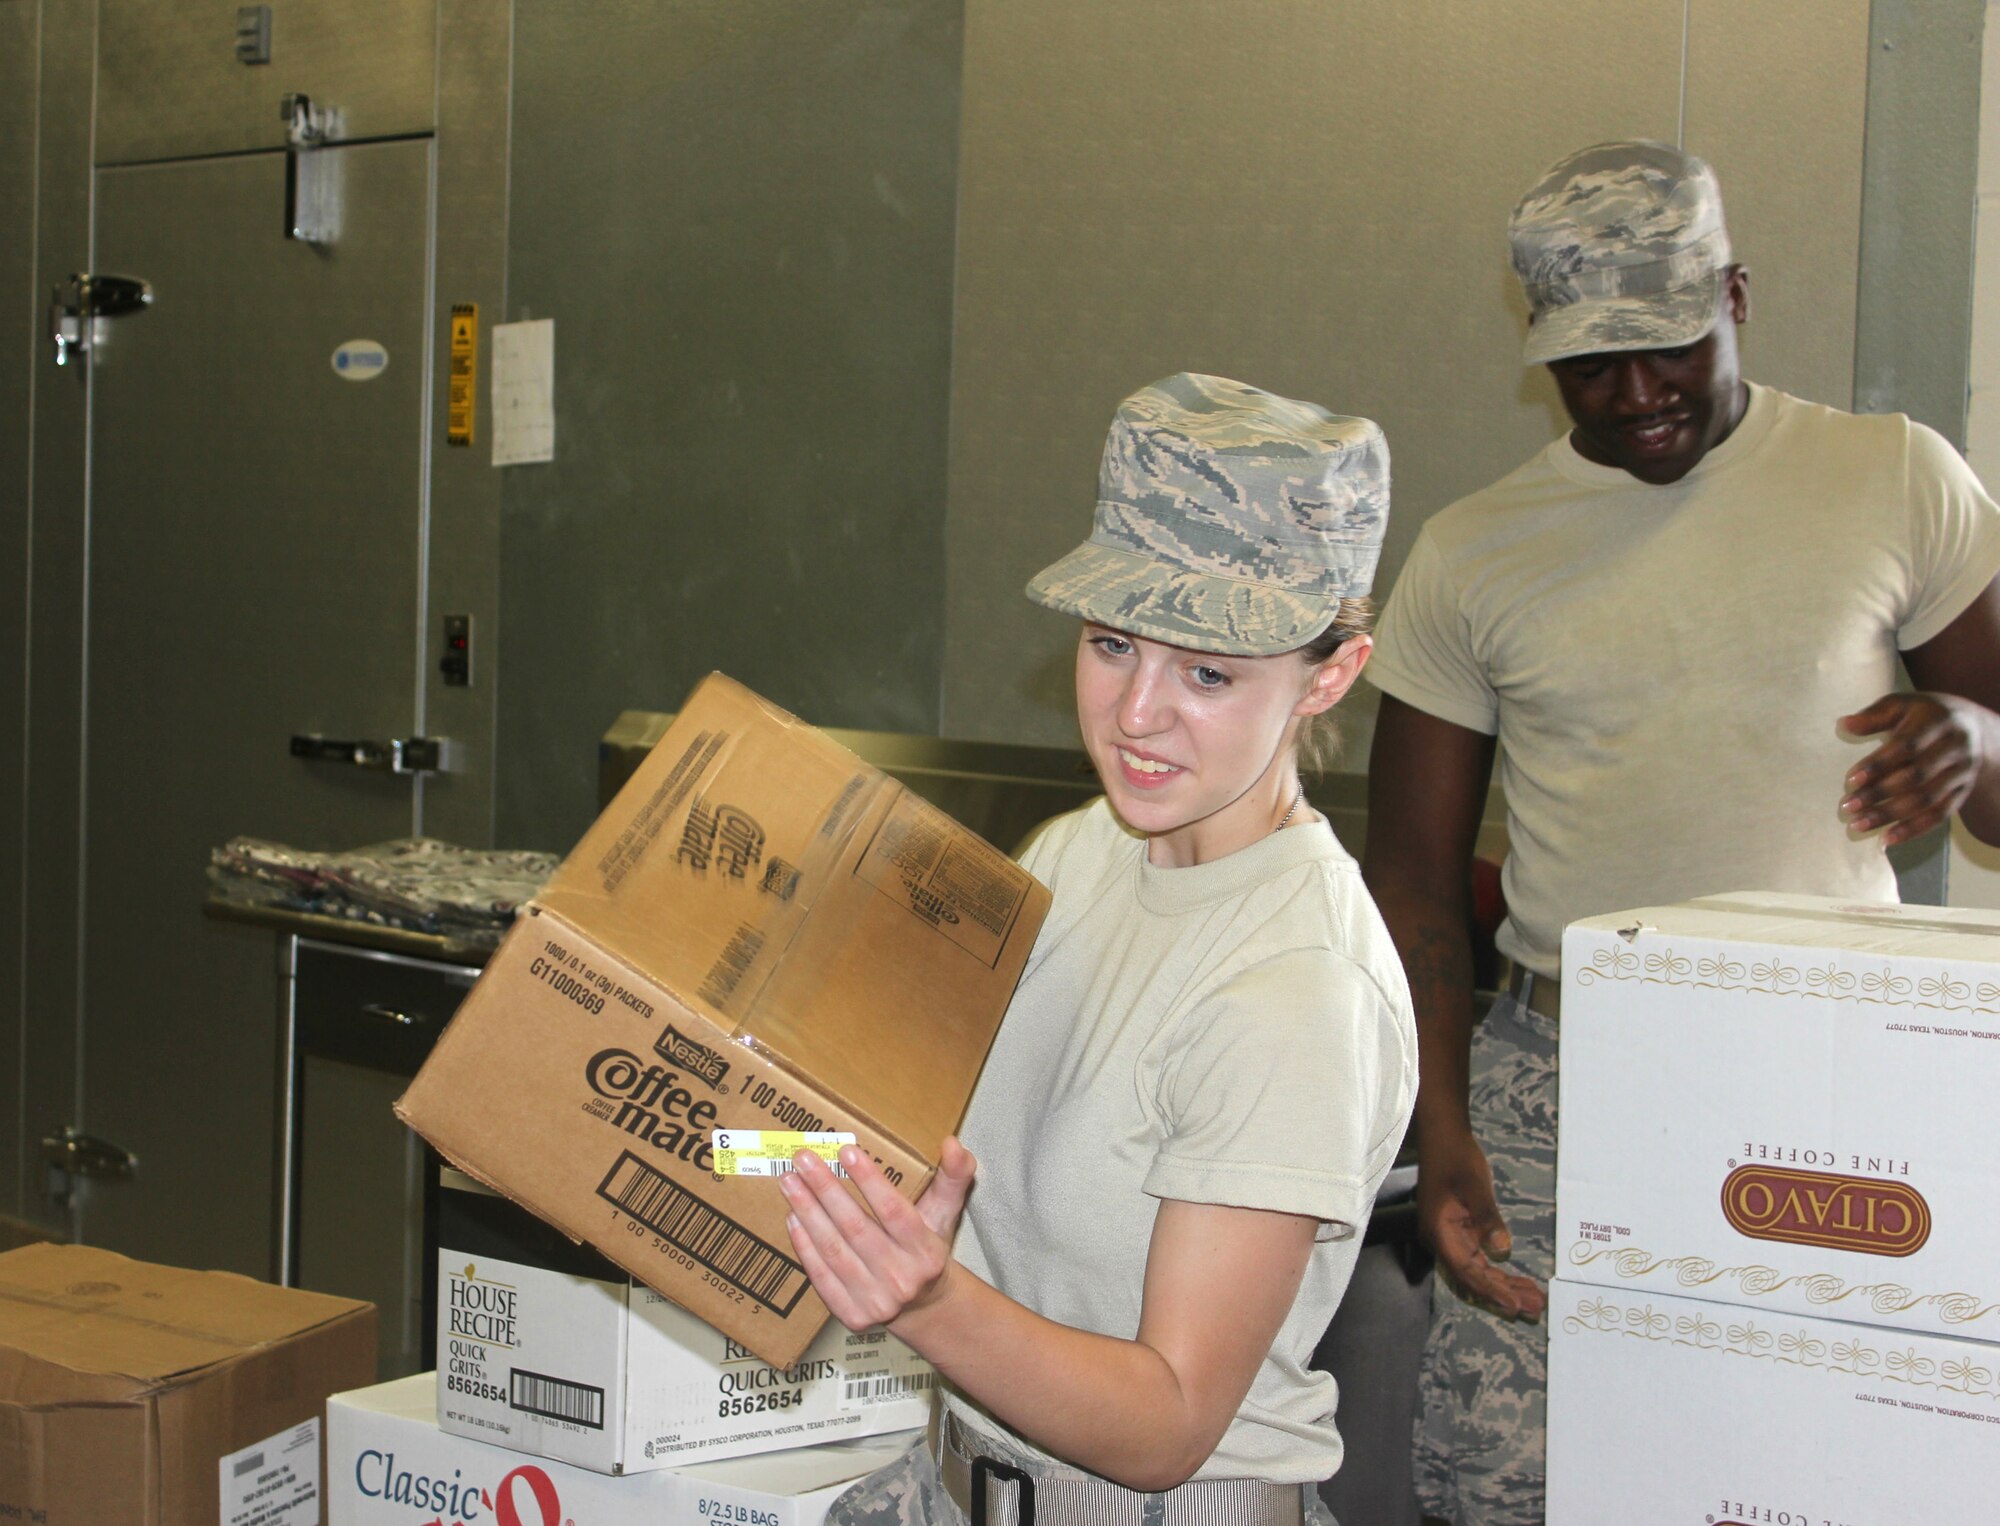 Airman First Class Katie Wainwright and Staff Sgt. Marcus Roberts, food services personnel in the New Jersey Air National Guard's 108th Force Support Squadron, organize food supplies at Carlisle County High School in Bardwell, Ky., July 14, 2016. The Kentucky Air National Guard and the U.S. Navy Reserve will provide medical and dental care at no cost to residents in three Western Kentucky locations from July 18 to 27 as part of Bluegrass Medical Innovative Readiness Training, a program co-sponsored by the U.S. Department of Defense and the Delta Regional Authority. (U.S. Navy Reserve photo by Petty Officer 2nd Class Cathan Bricker)